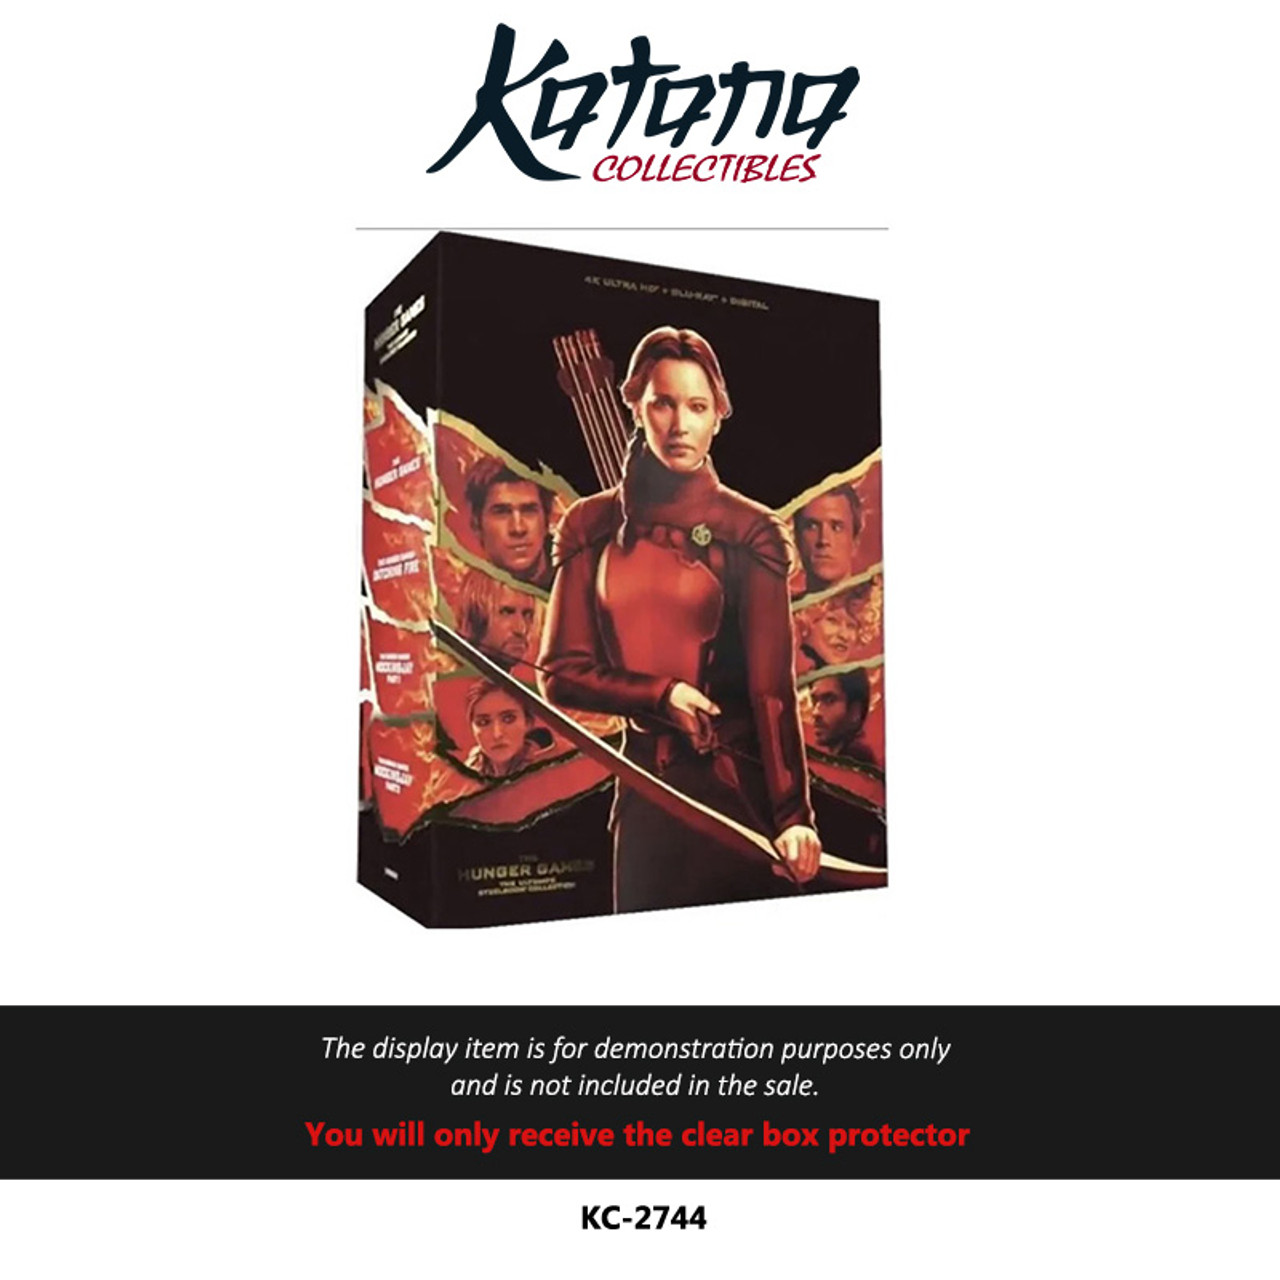 Katana Collectibles Protector For The Hunger Games: Ultimate 4K Steelbook Collection